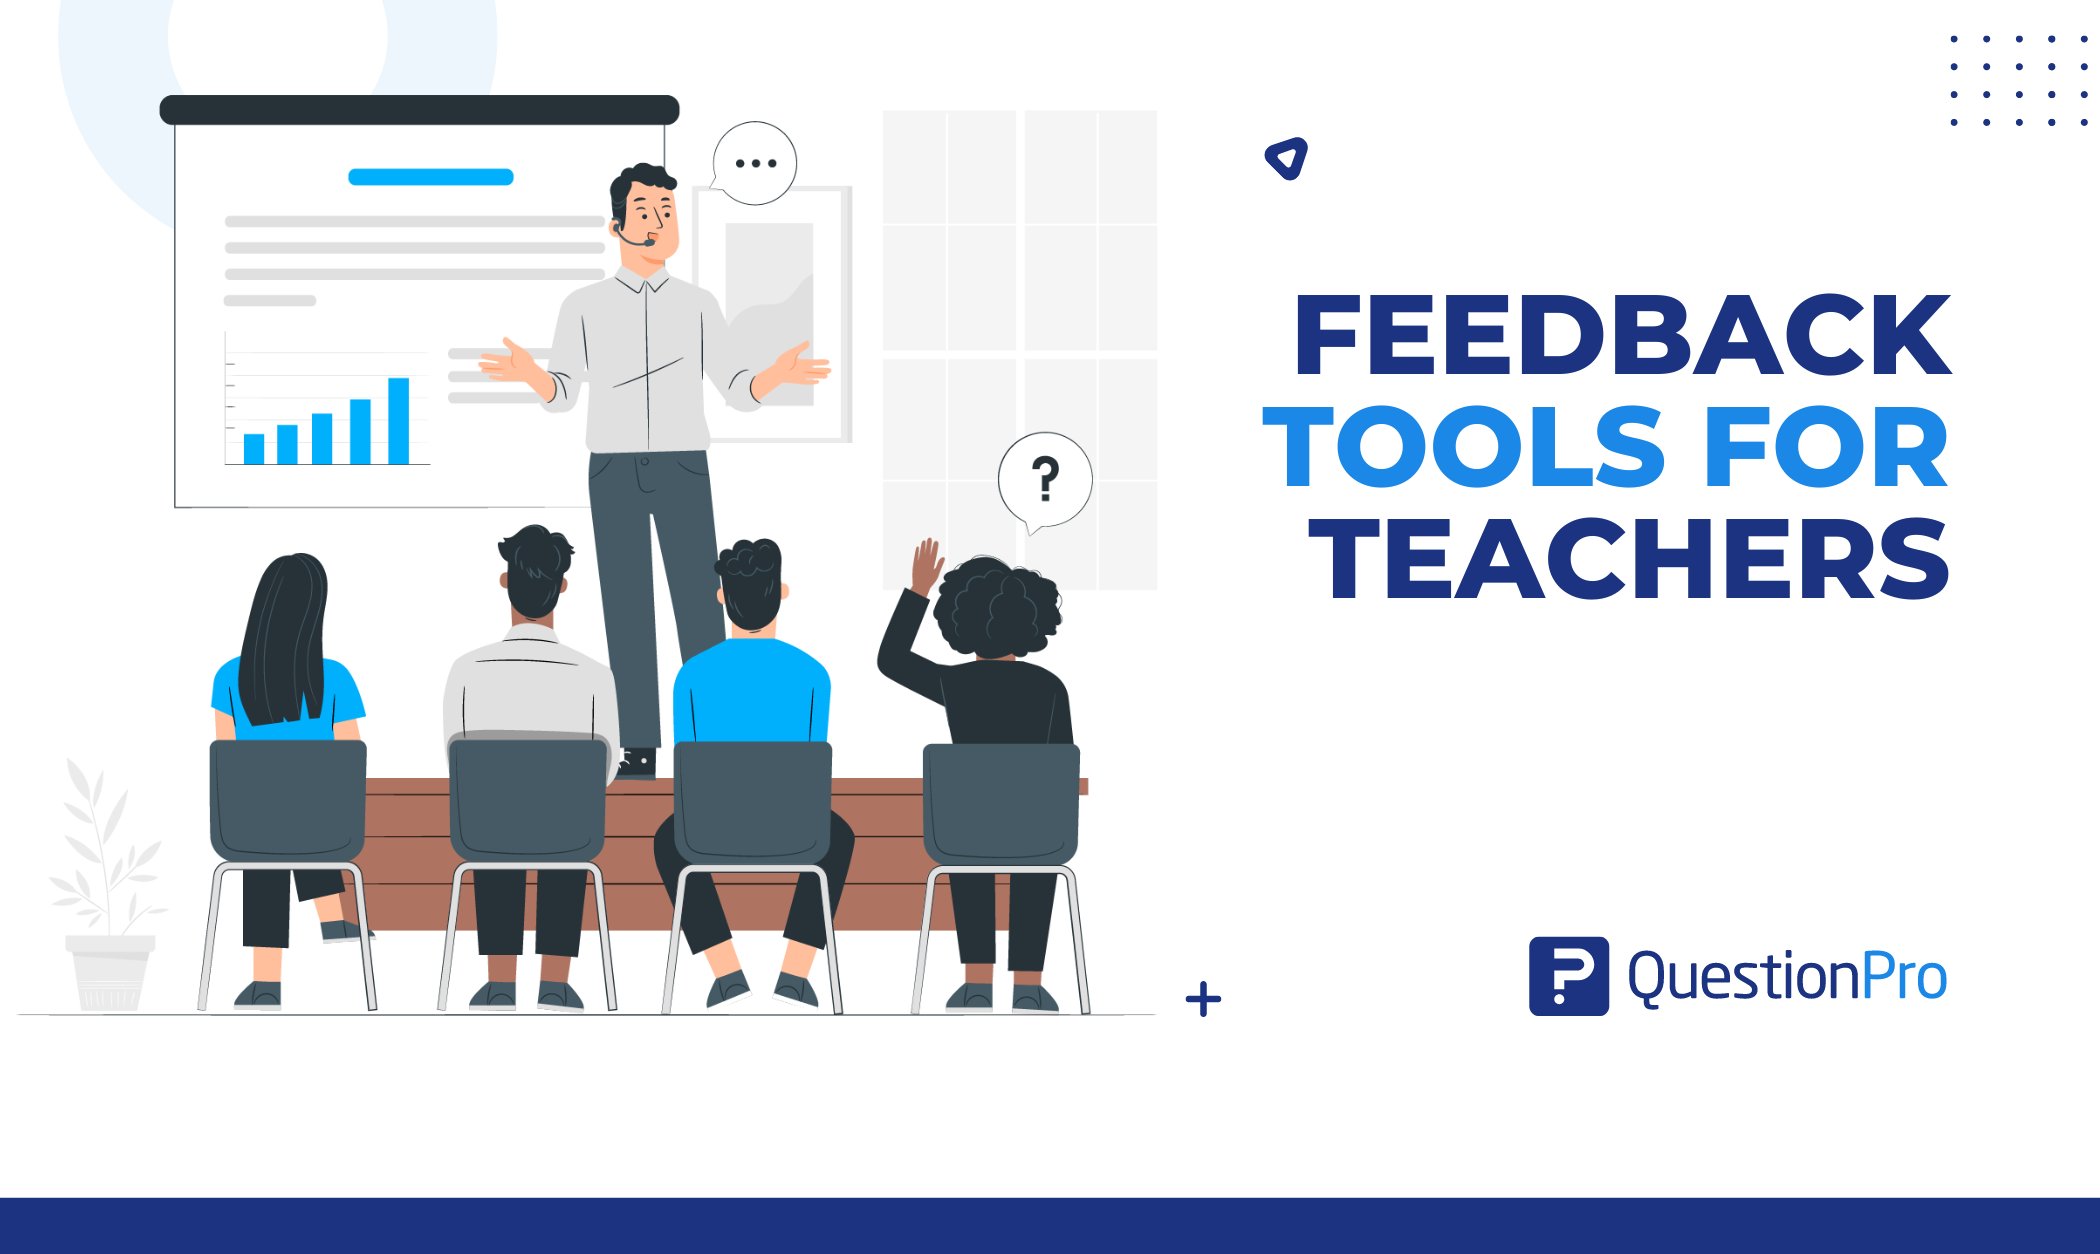 Use Livepolls as one of the best feedback tools for teachers that empower real-time student feedback for educational transformation. Learn more.